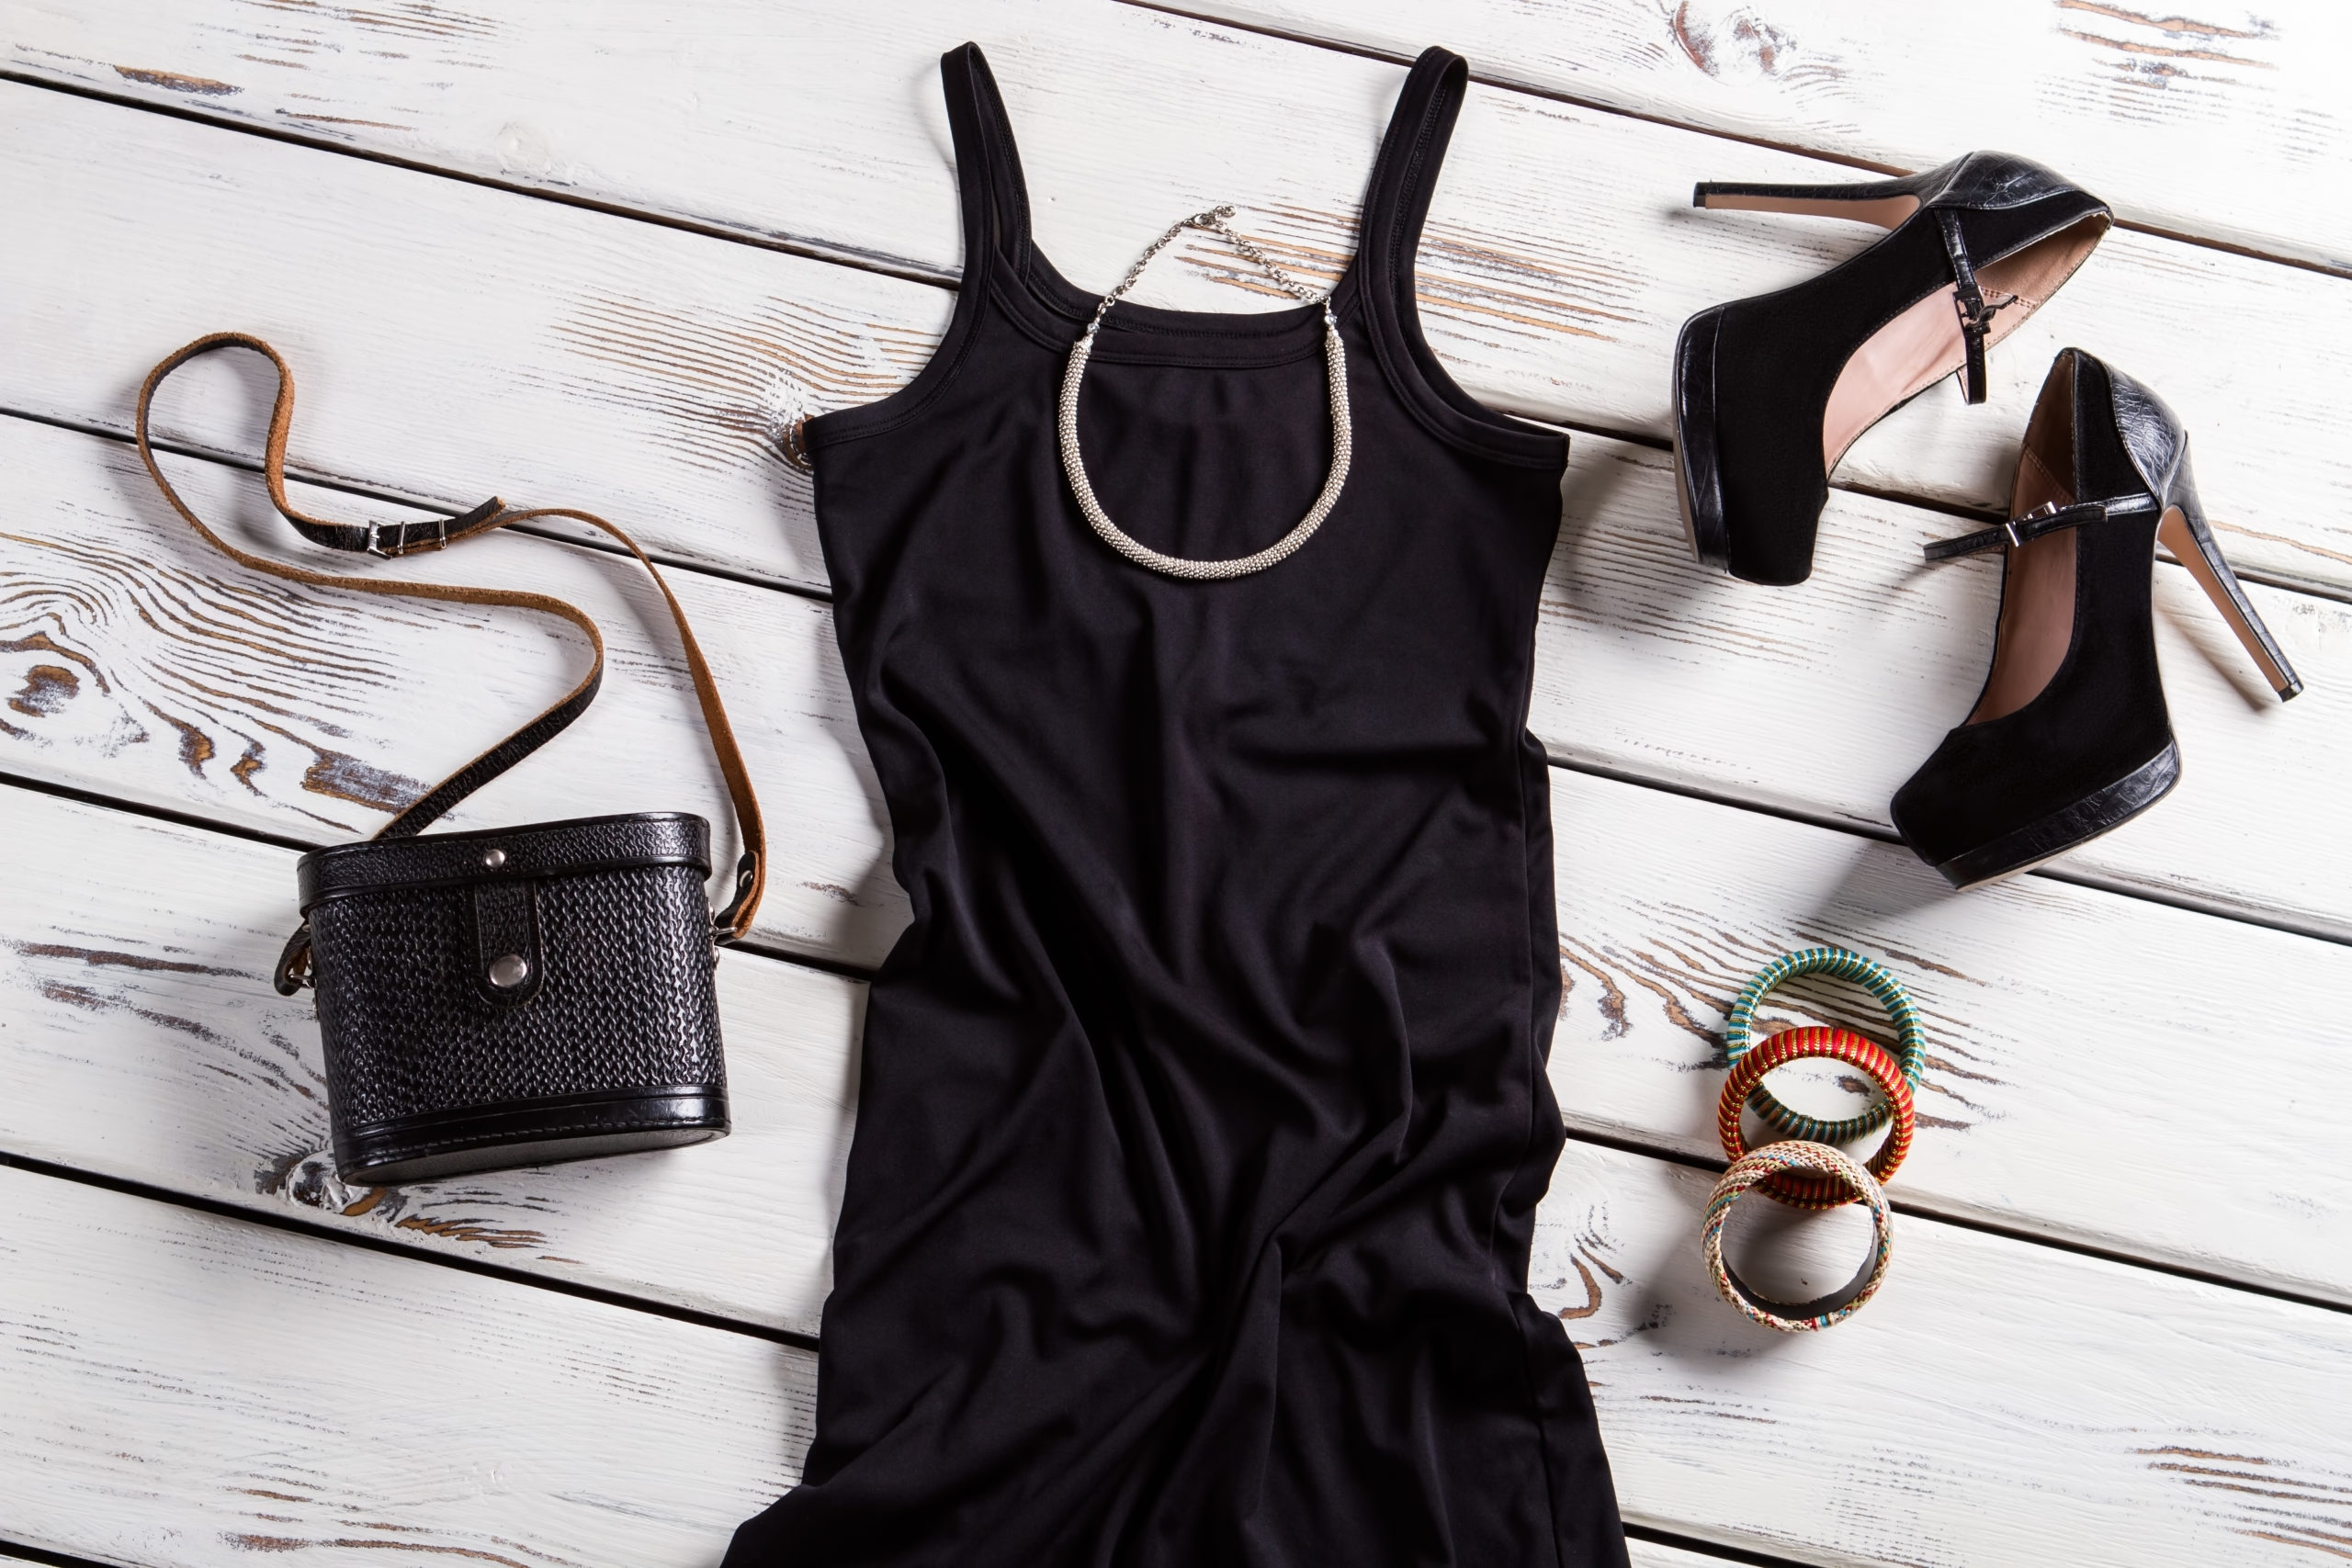 Black dress and small necklace. Jewelry and clothes on shelf. Frosted heel shoes and accessories. Suede shoes and retro purse.